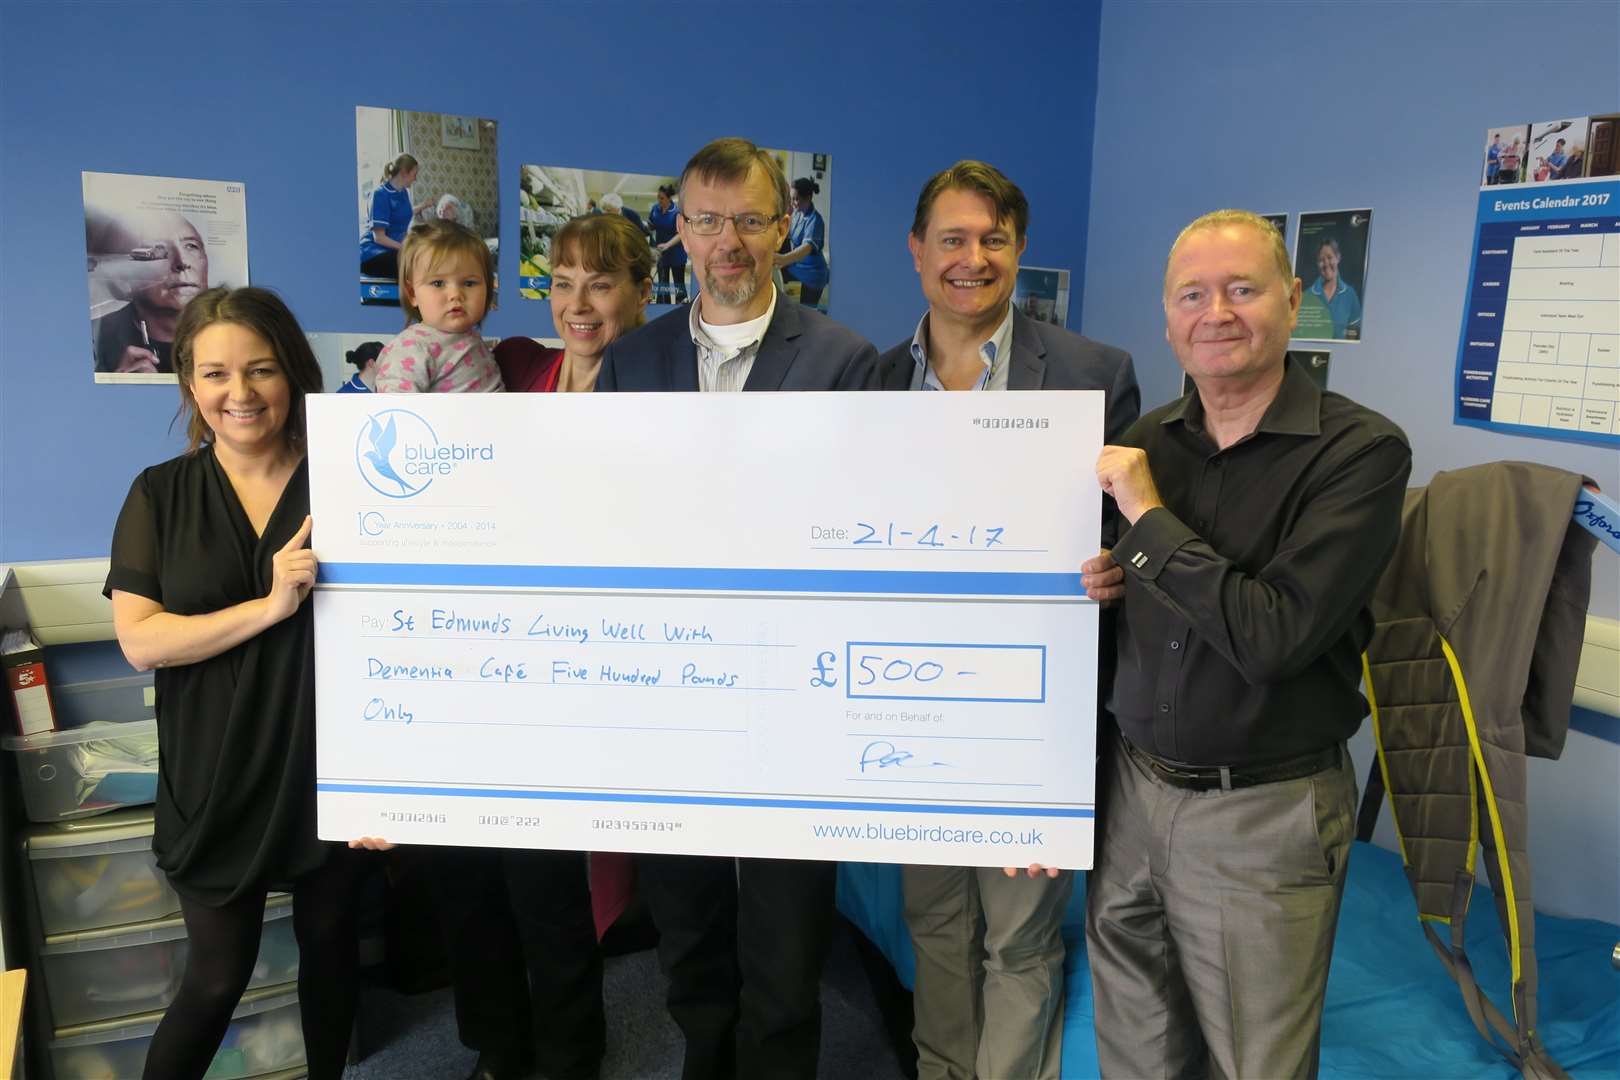 Bluebird Care donated a £500 grant to launch a dementia cafe at St Edmunds Church in Dartford